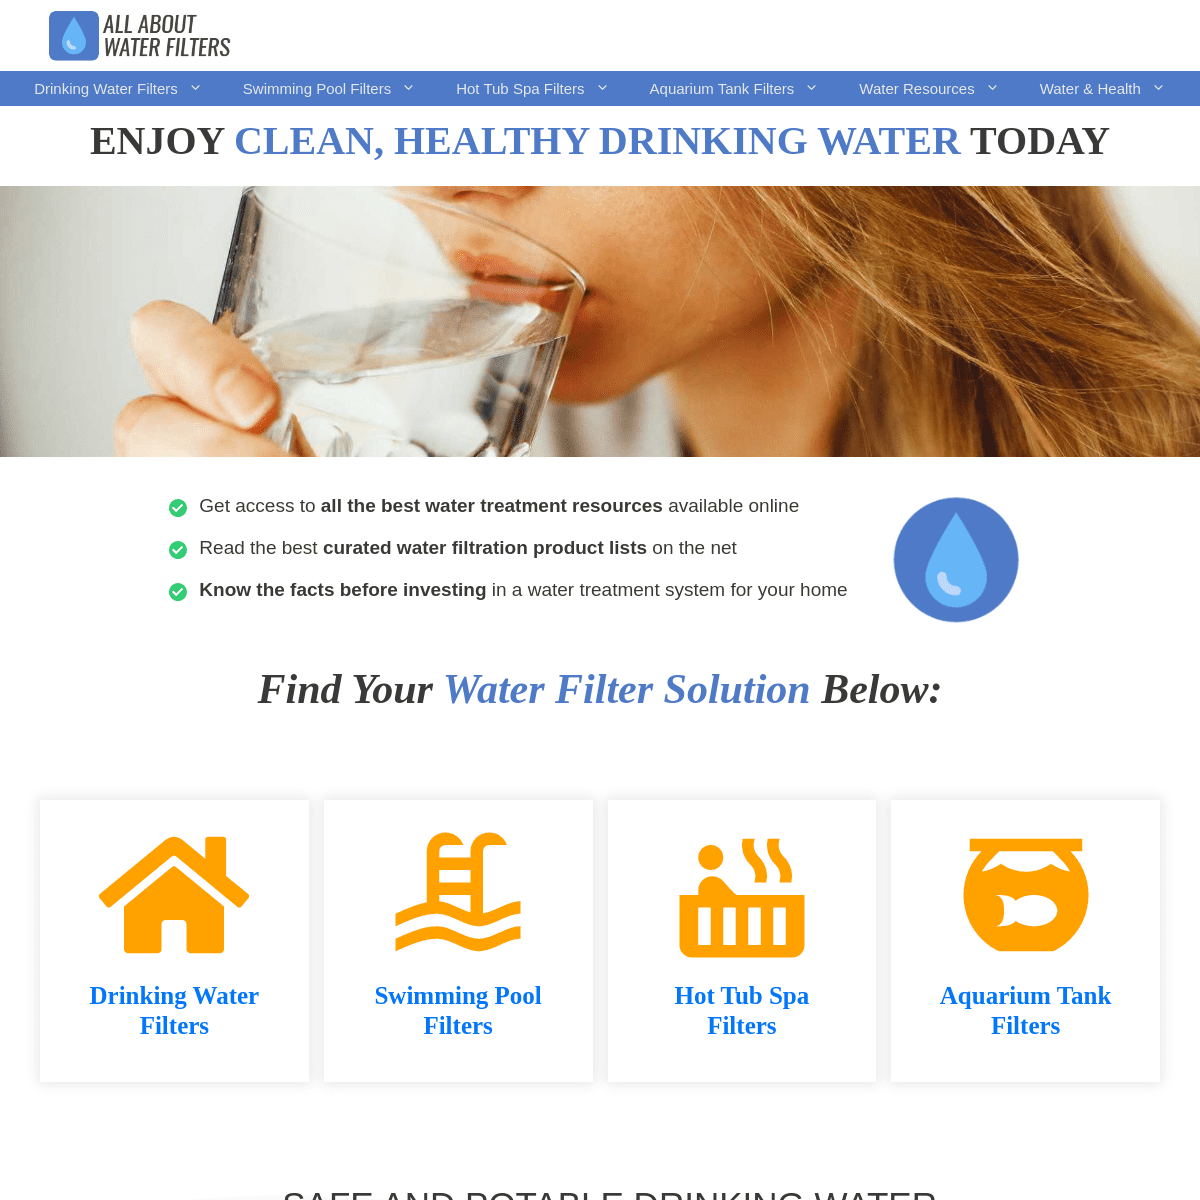 A complete backup of https://all-about-water-filters.com